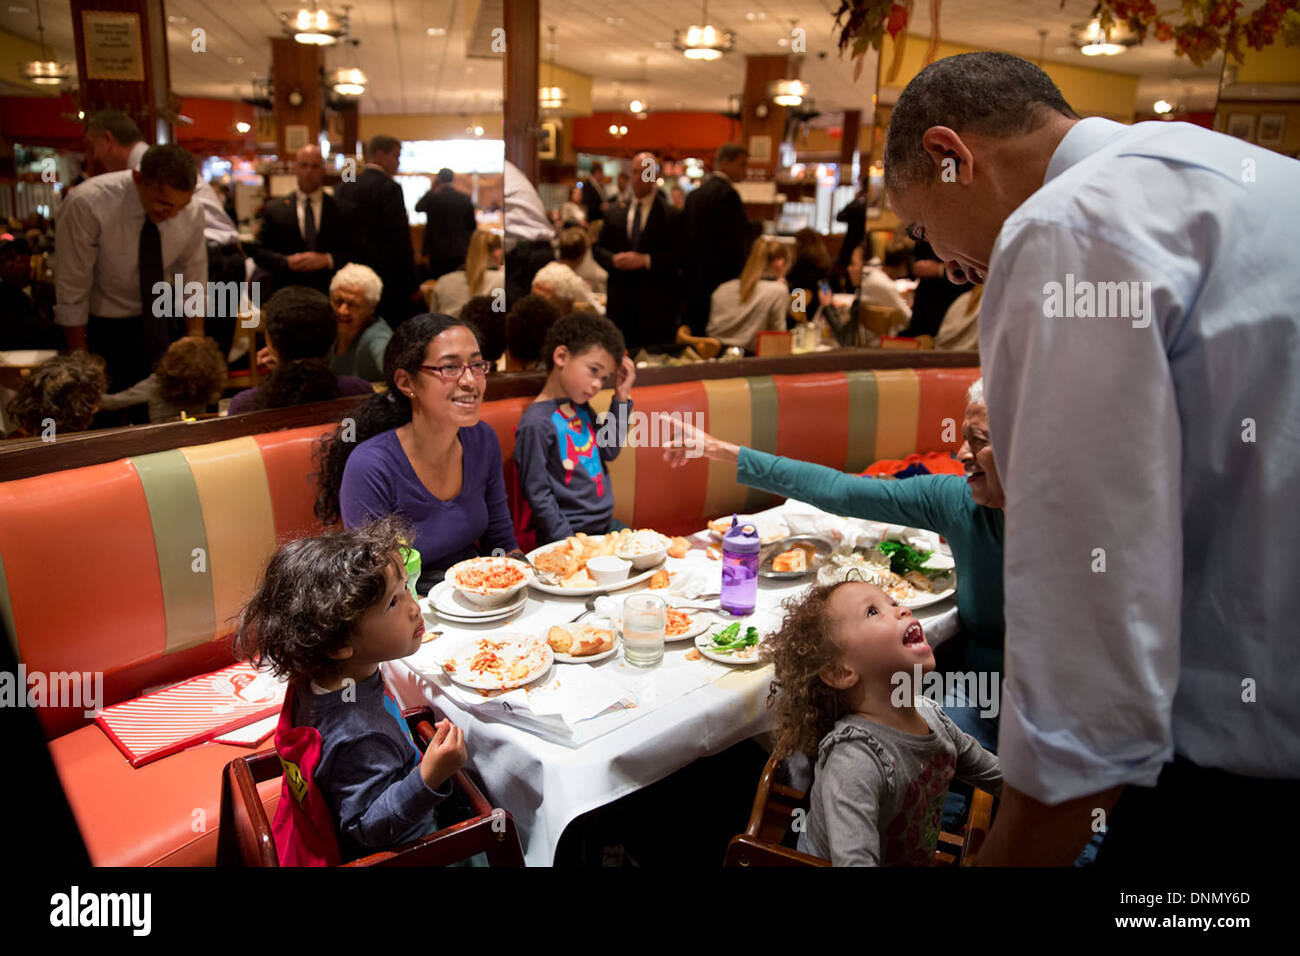 US President Barack Obama talks with young girl as he greets customers at Junior's Cheesecake with New York City mayoral candidate Bill de Blasio October 25, 2013 in Brooklyn, NY. Stock Photo